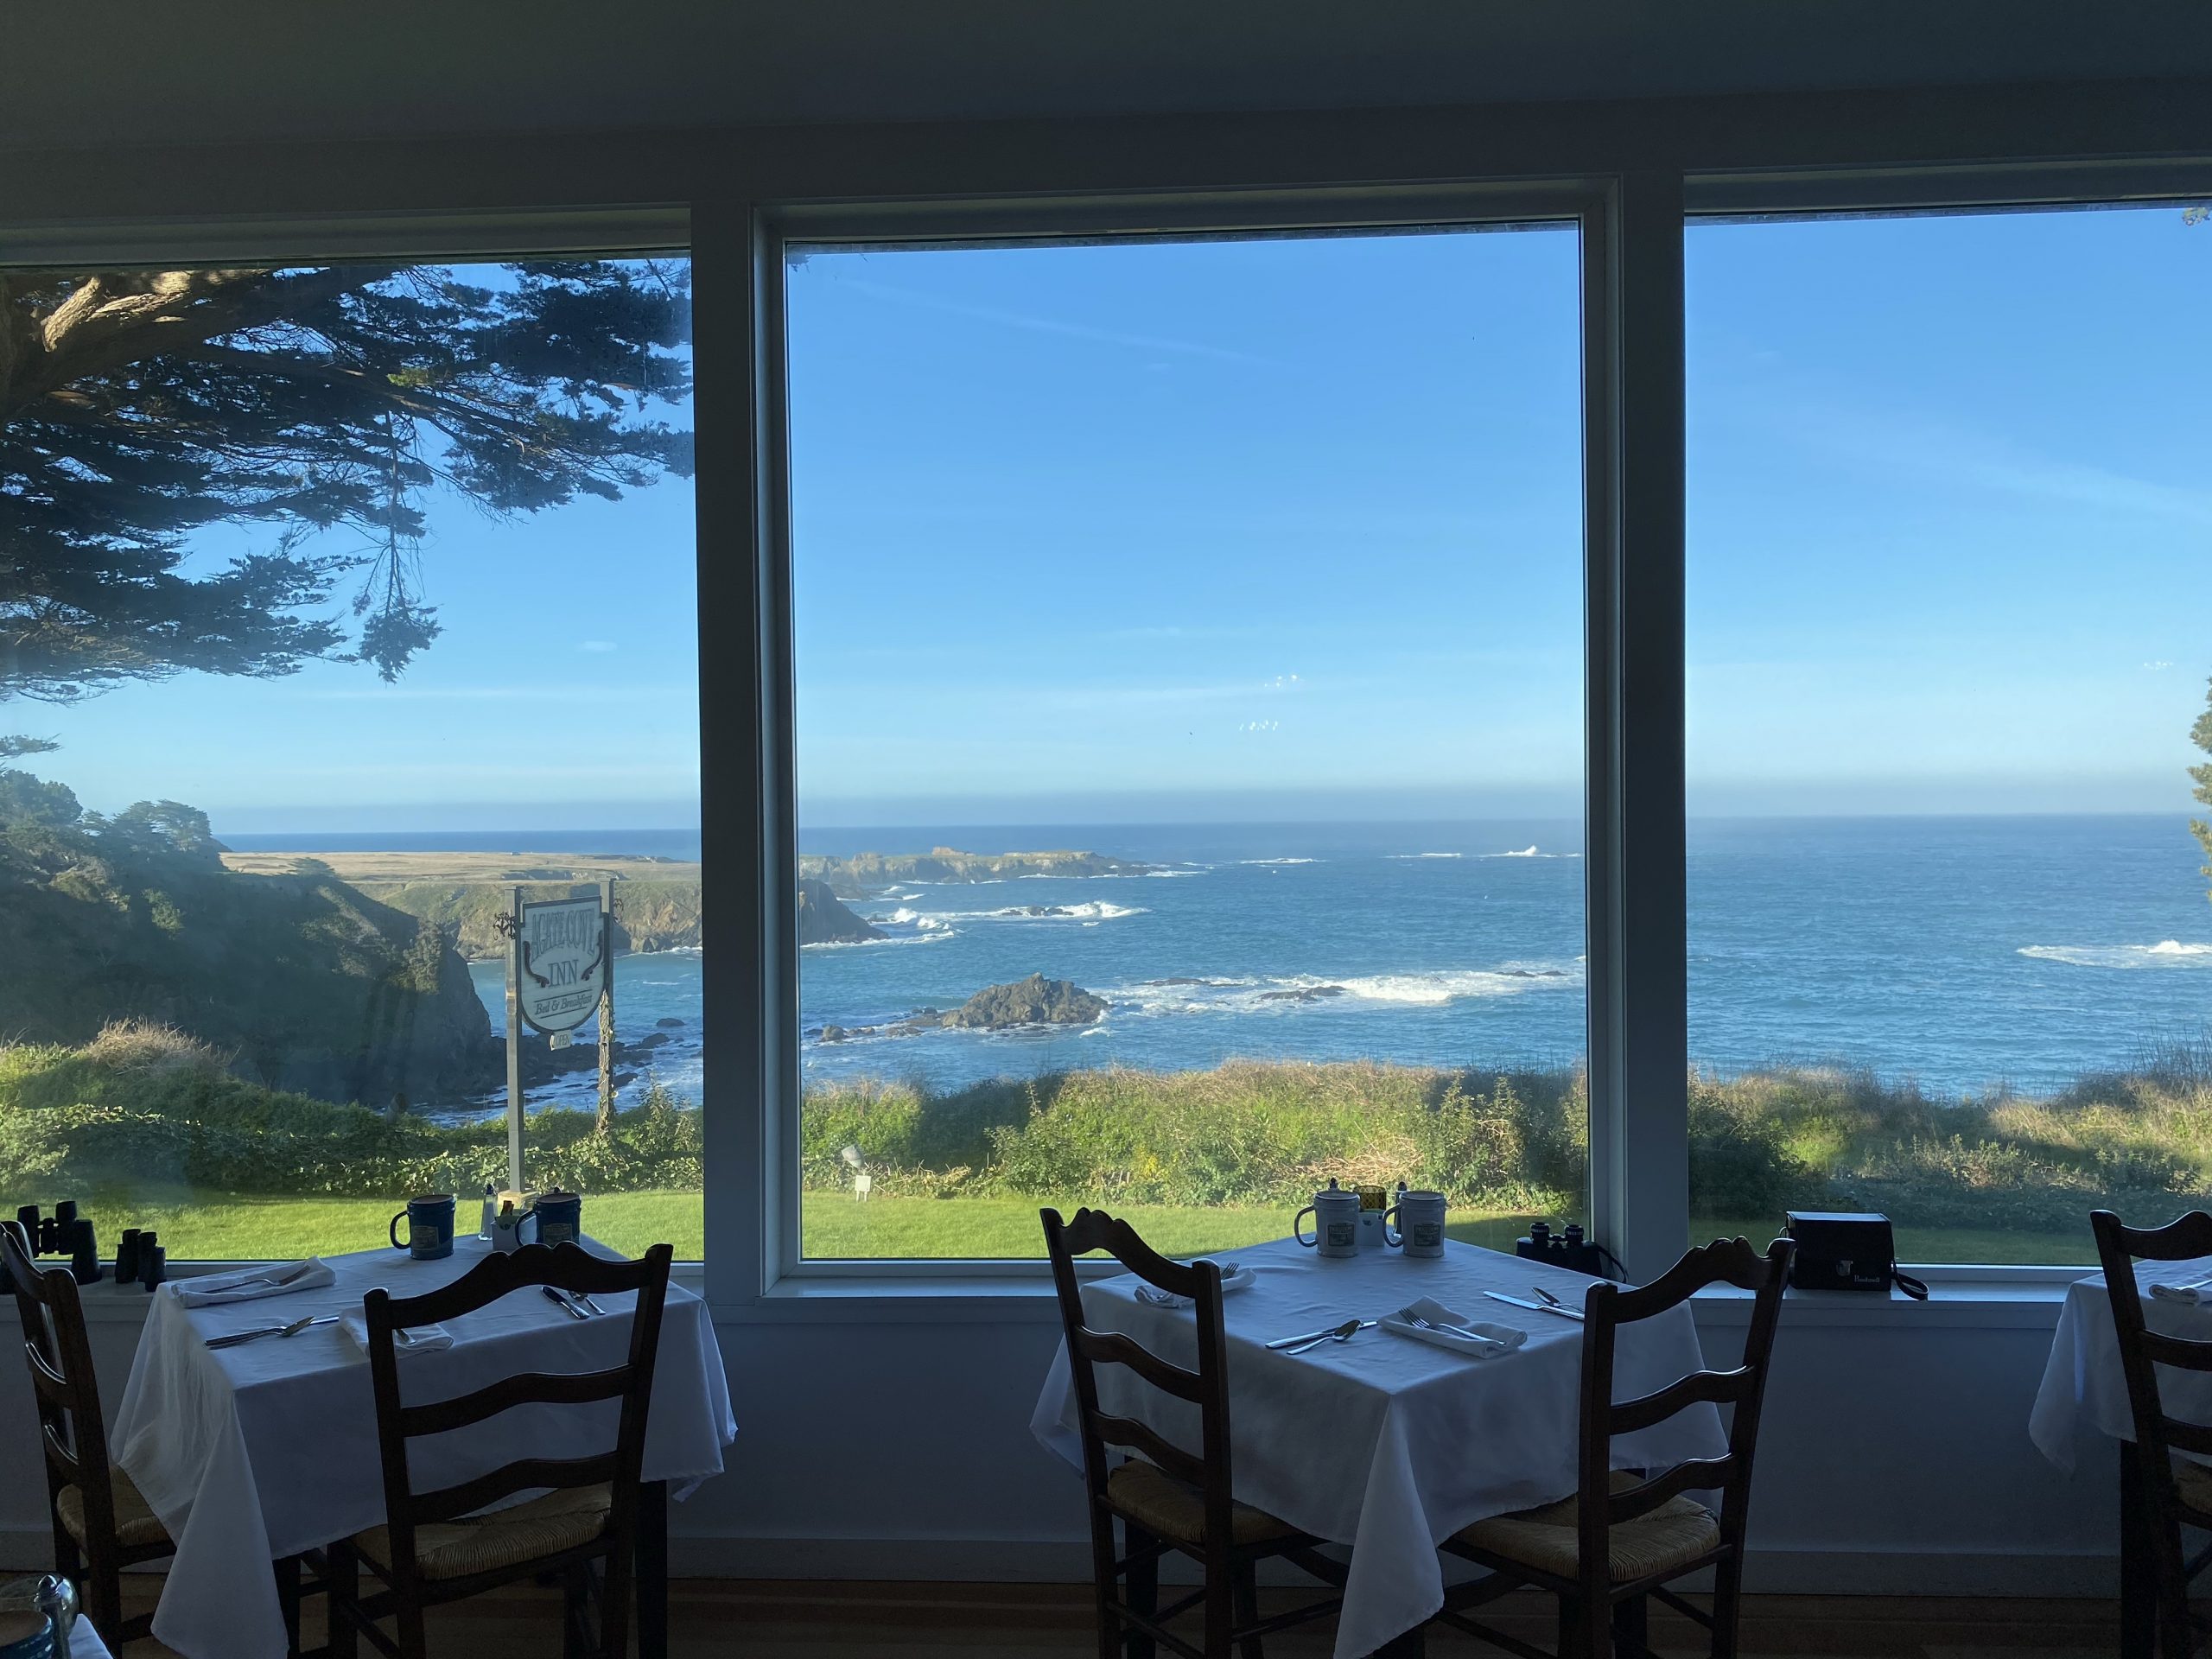 Our Stay at Agate Cove Inn in Mendocino, California